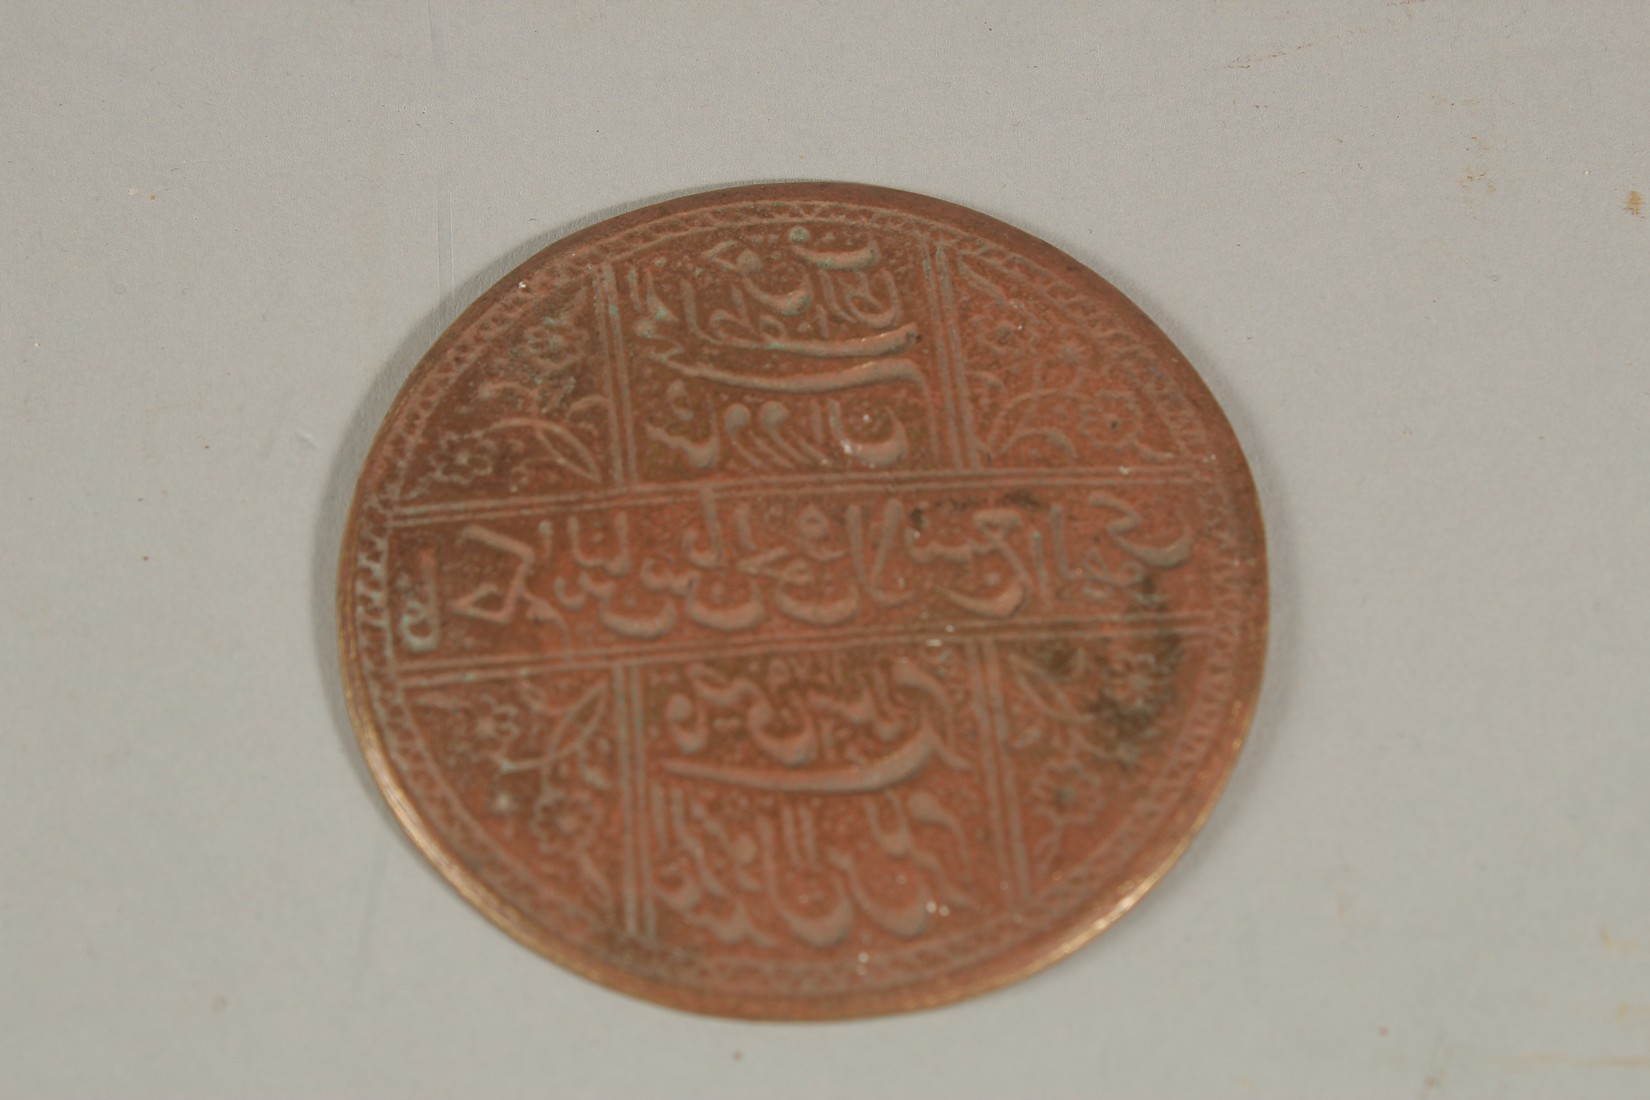 A RARE 18-19TH CENTURY MUGHAL INDIAN OFFICIAL'S COPPER SEAL, 7cm diameter.